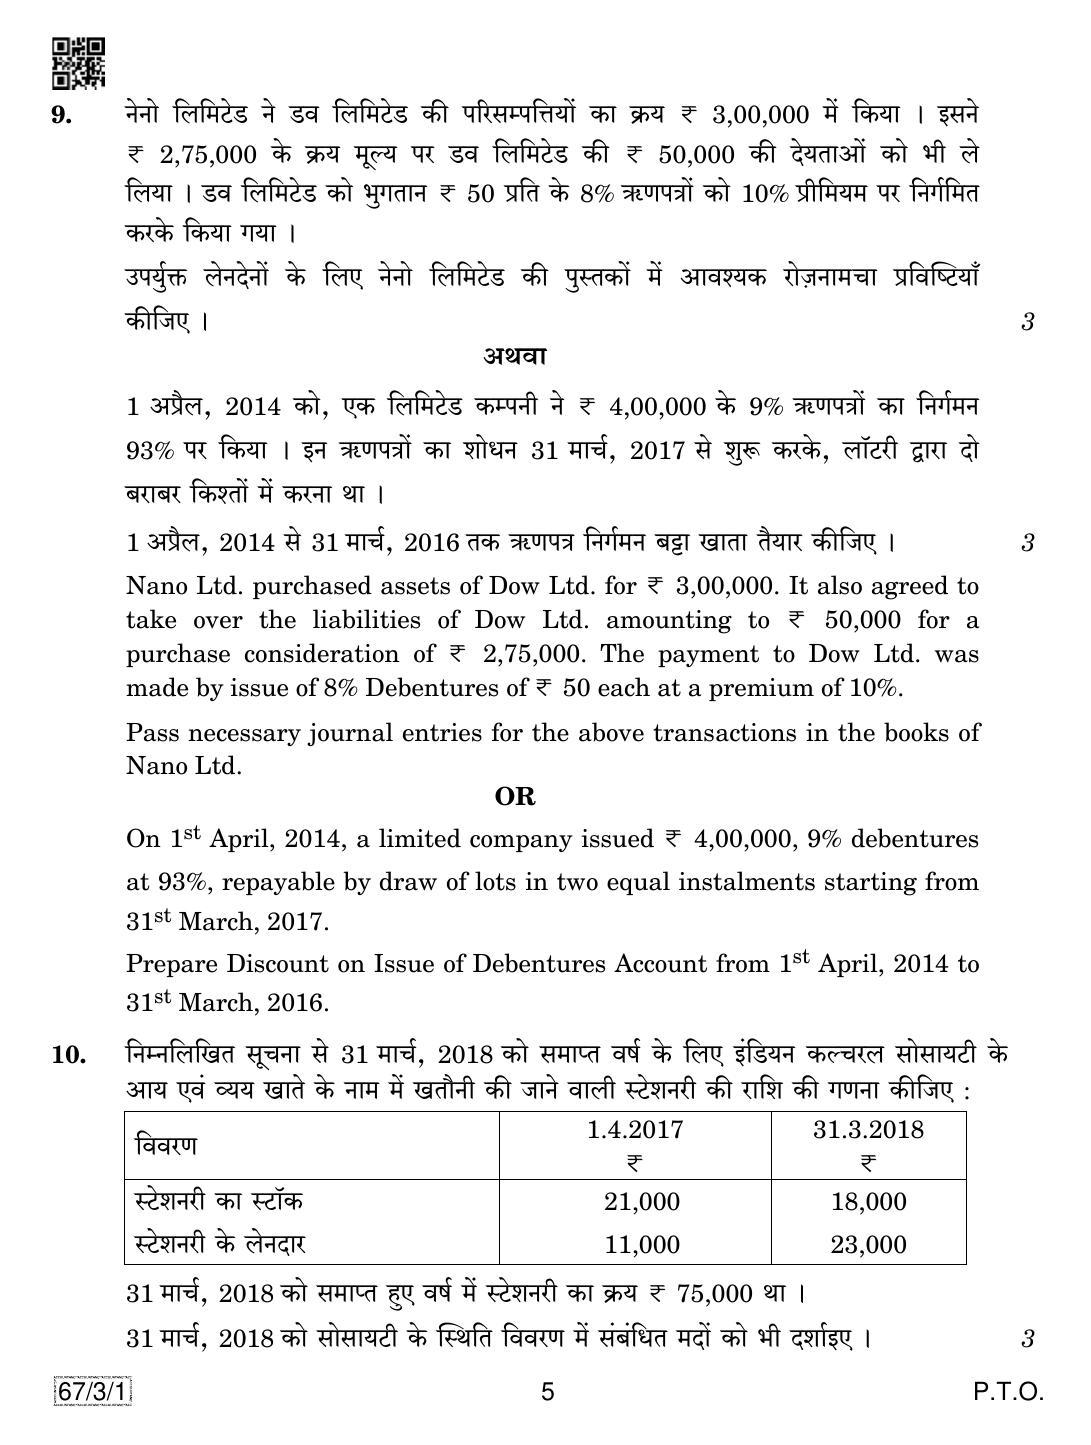 CBSE Class 12 67-3-1 Accountancy 2019 Question Paper - Page 5